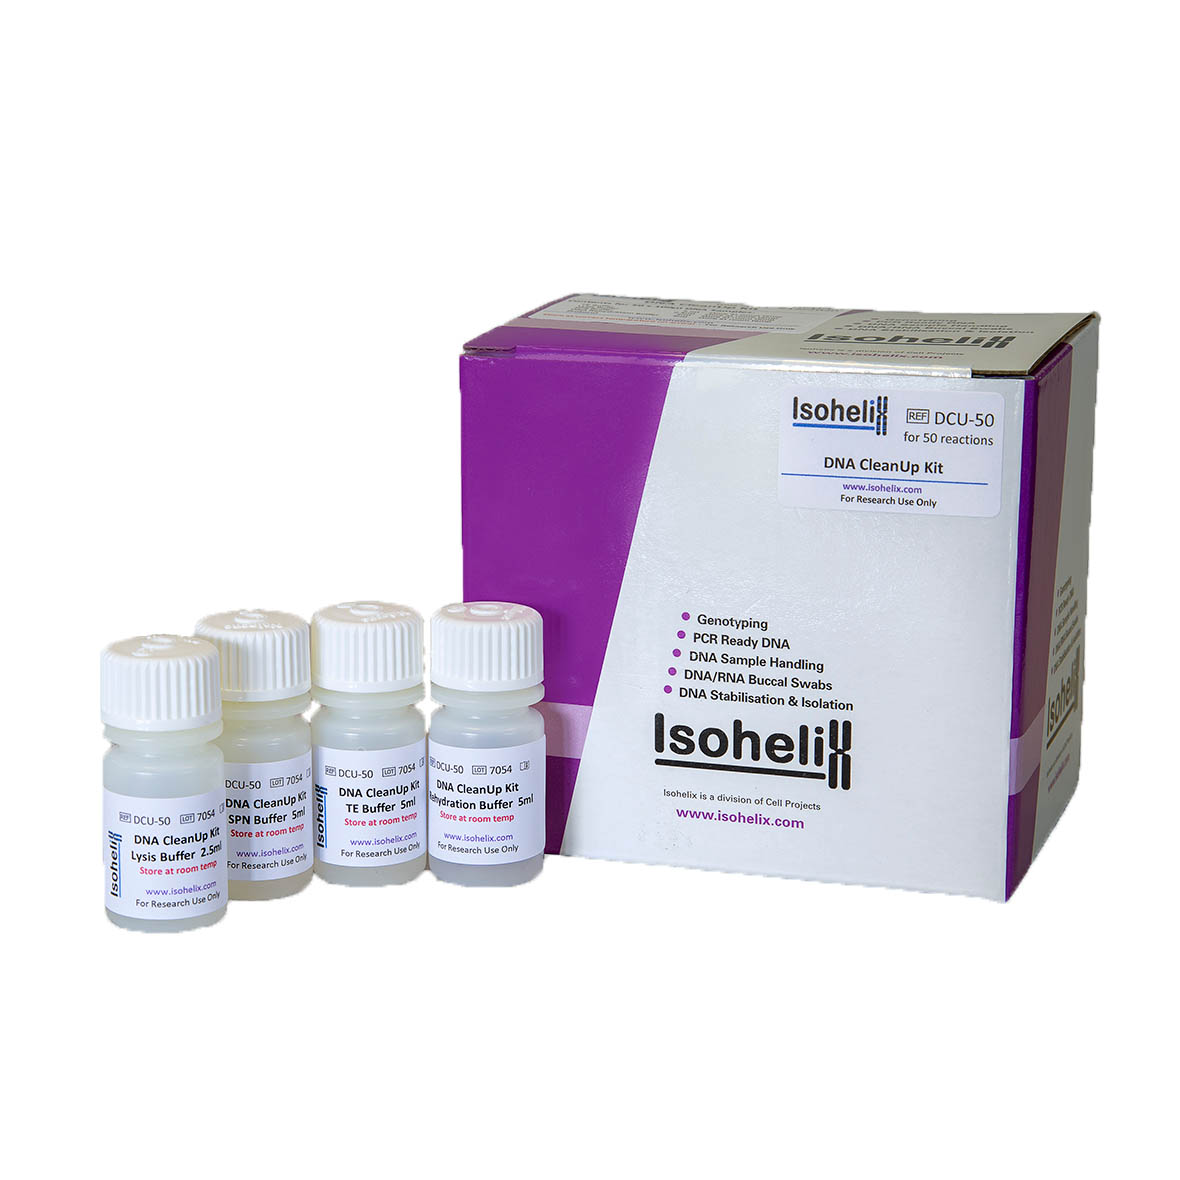 Isohelix DNA Cleanup Kit